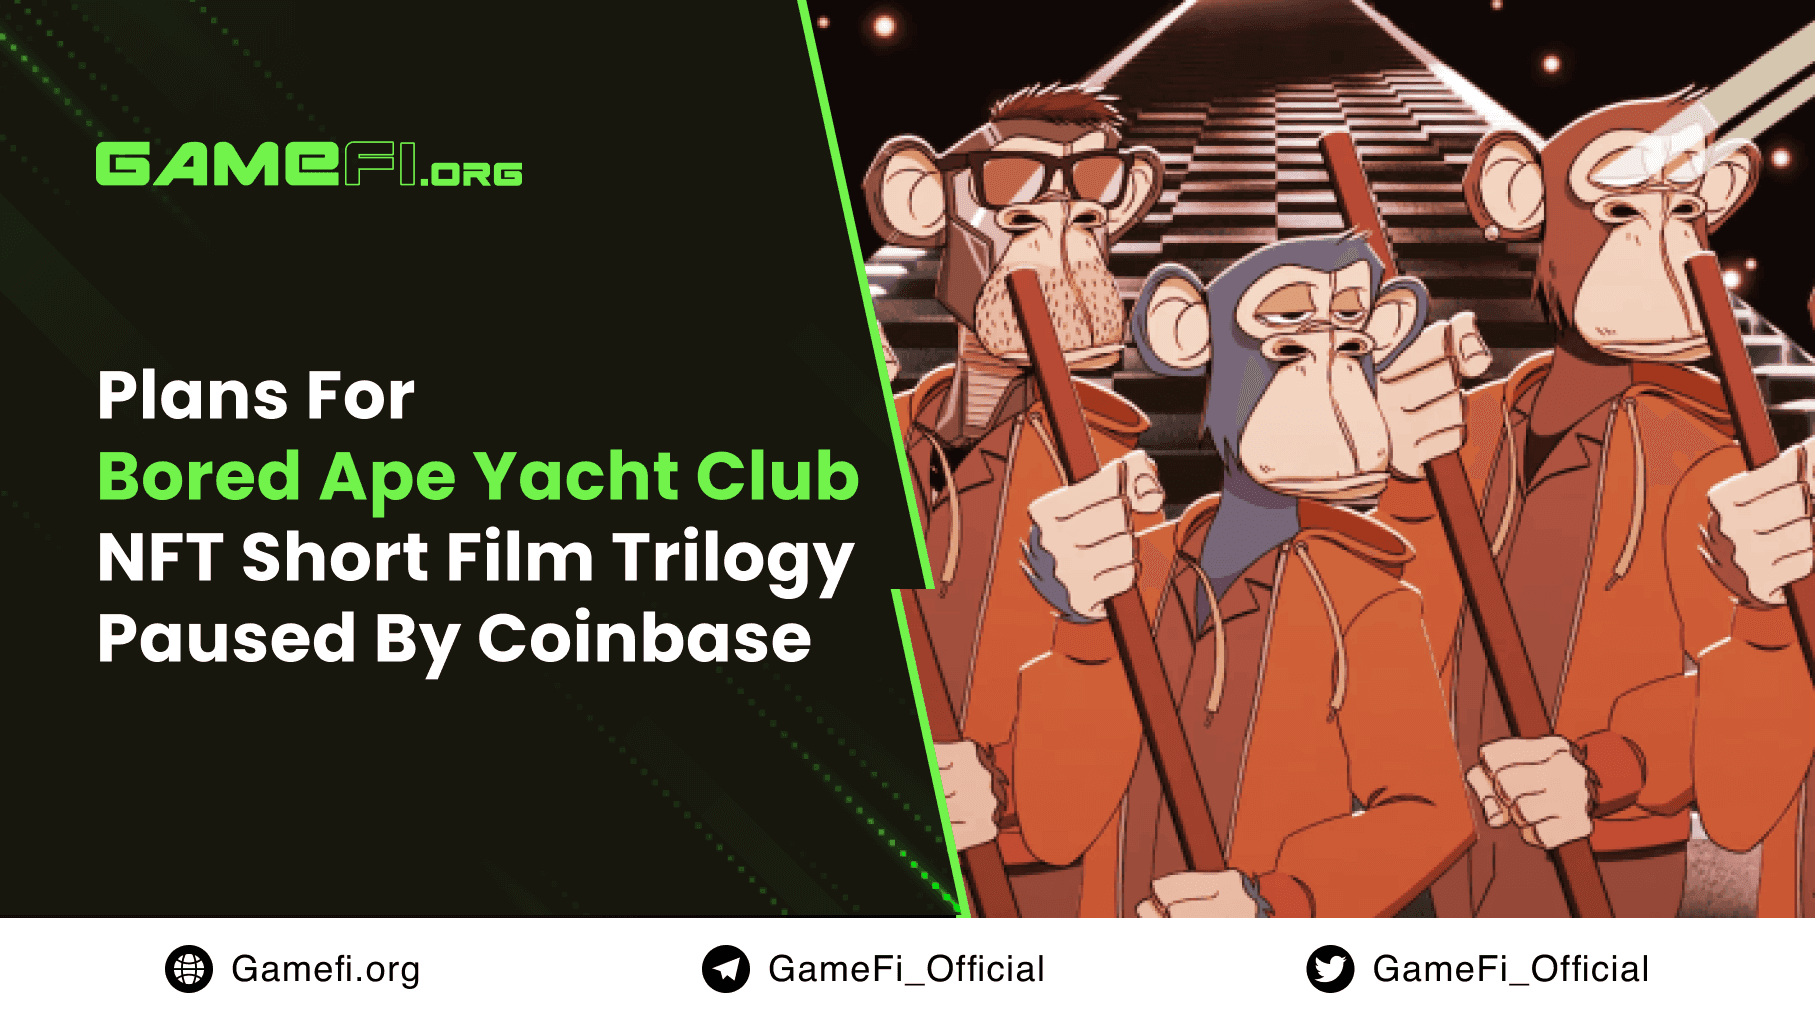 Plans for Bored Ape Yacht Club NFT Short Film Trilogy paused by Coinbase